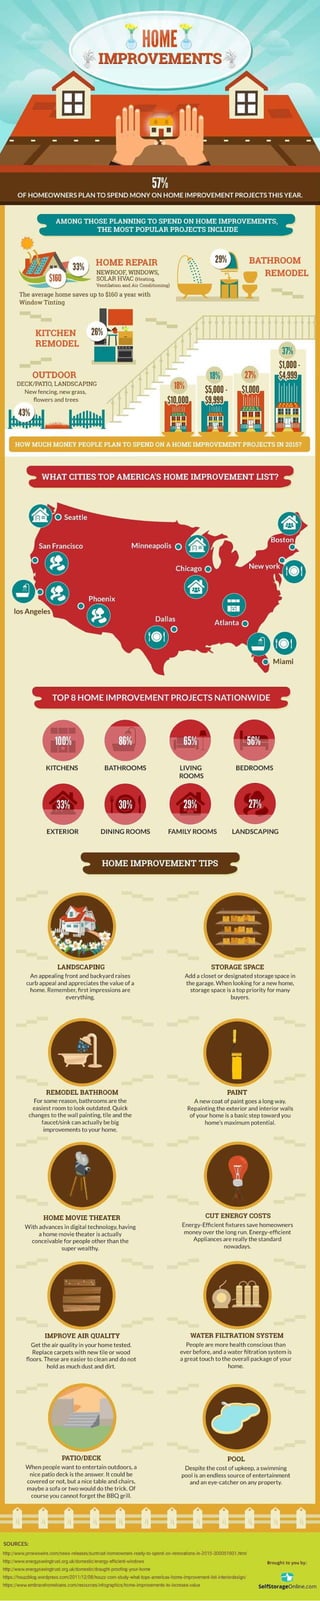 Home Improvements Trends in the US